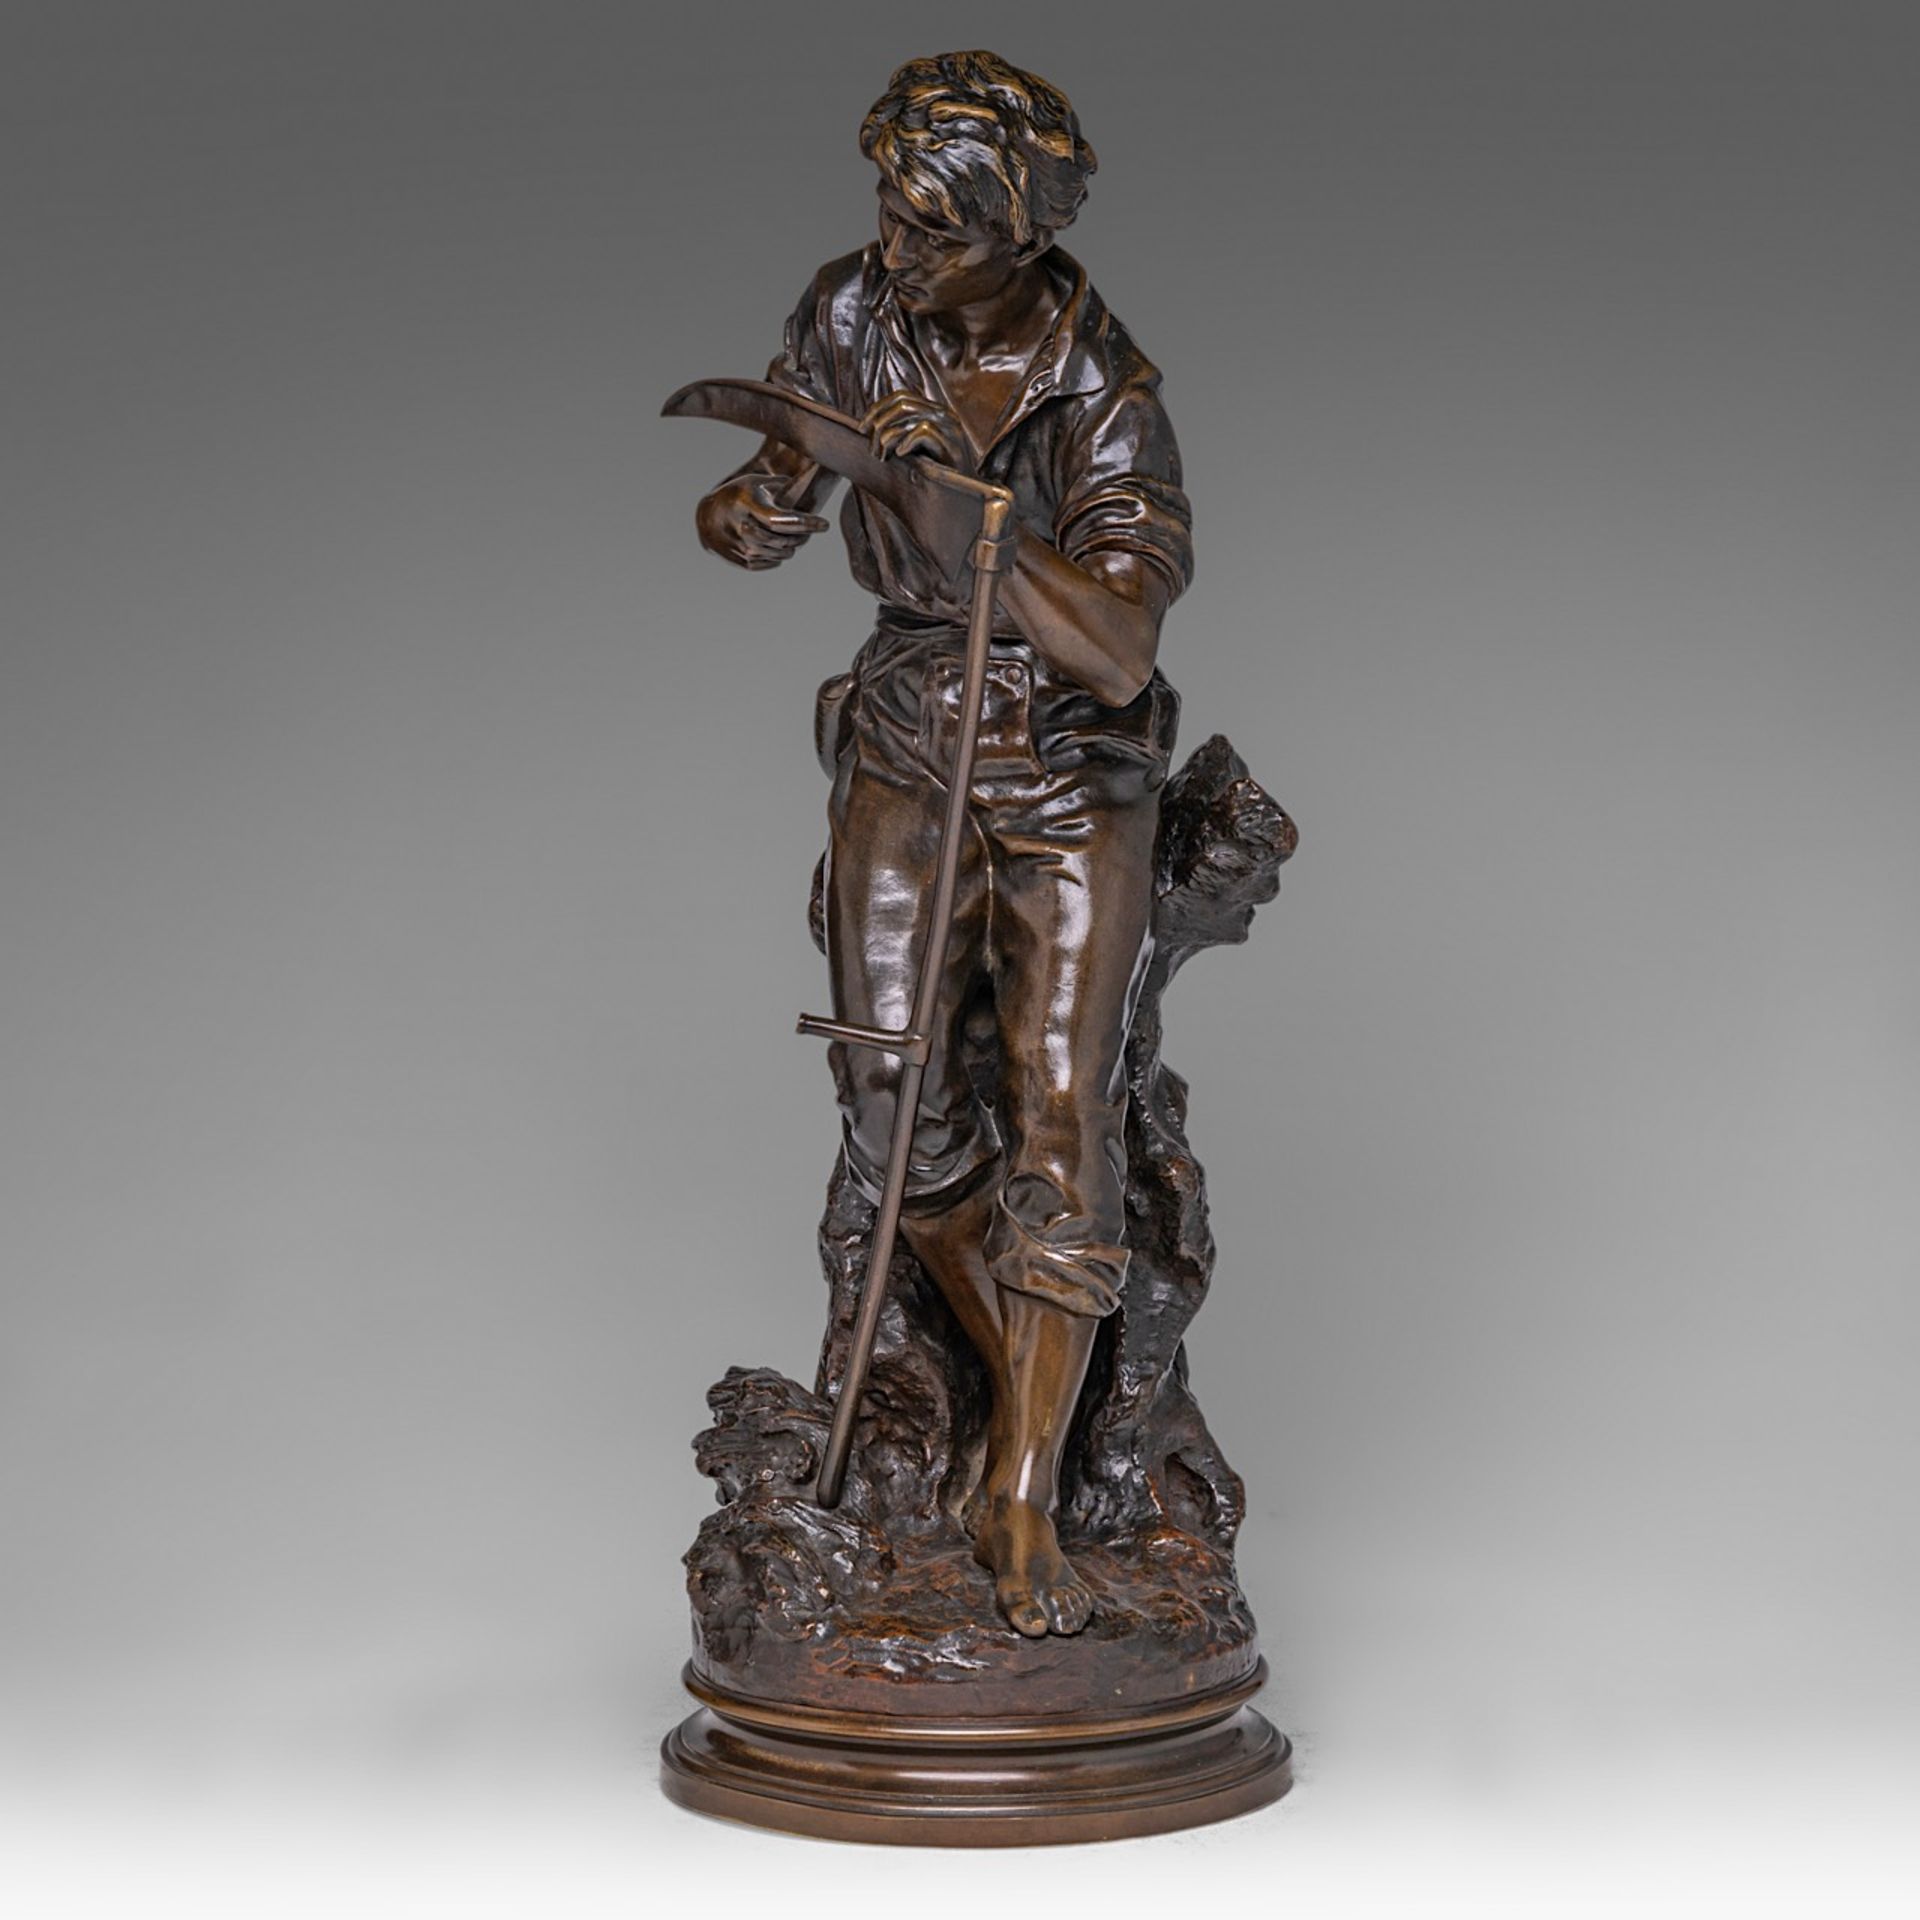 Mathurin Moreau (1822-1912), boy with scythe, patinated bronze, H 62 cm - Image 2 of 7